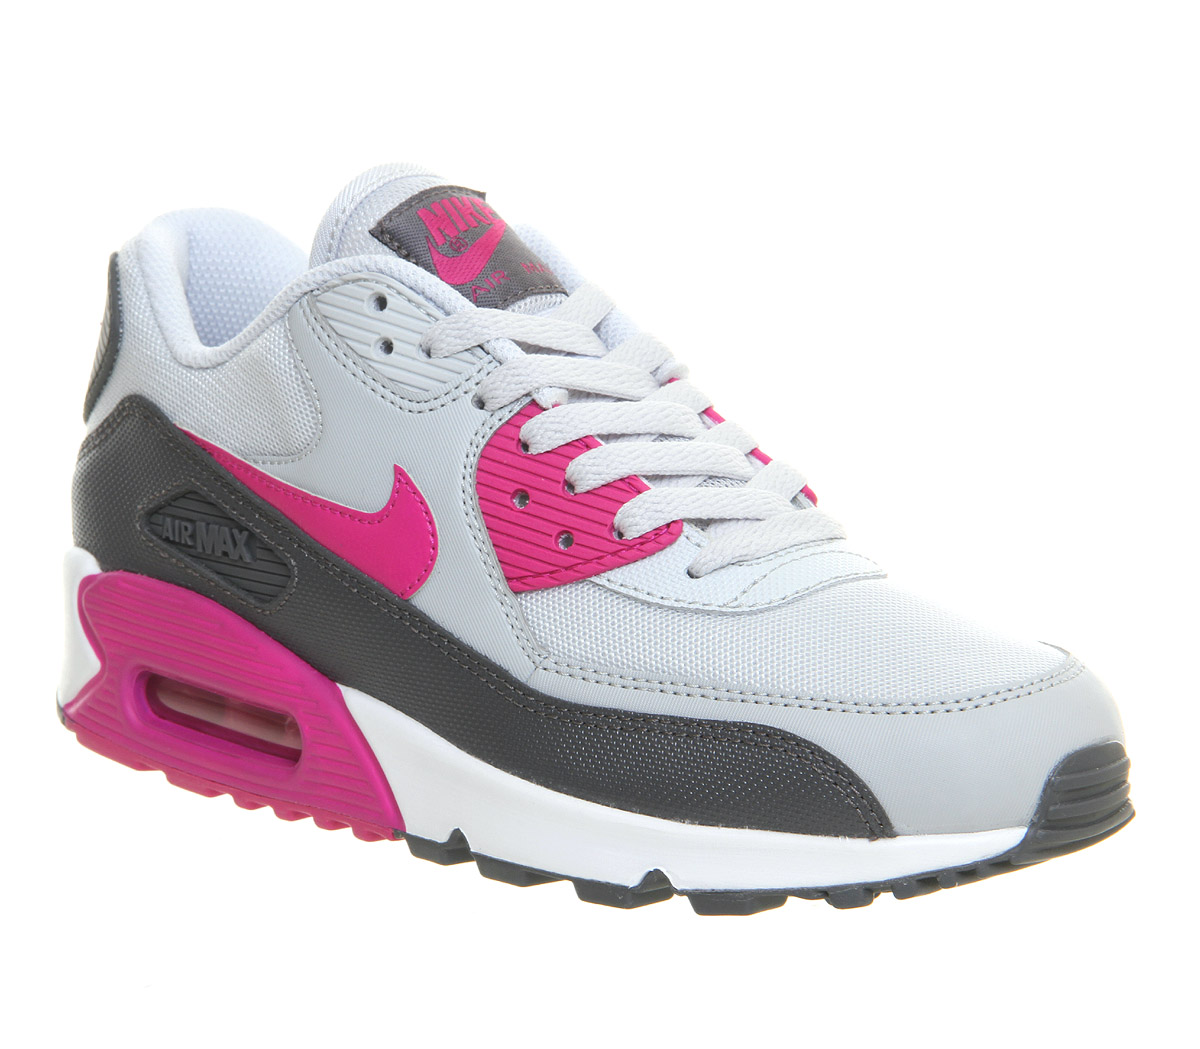 Nike Air Max 90 Pink Grey White - Women's Trainers